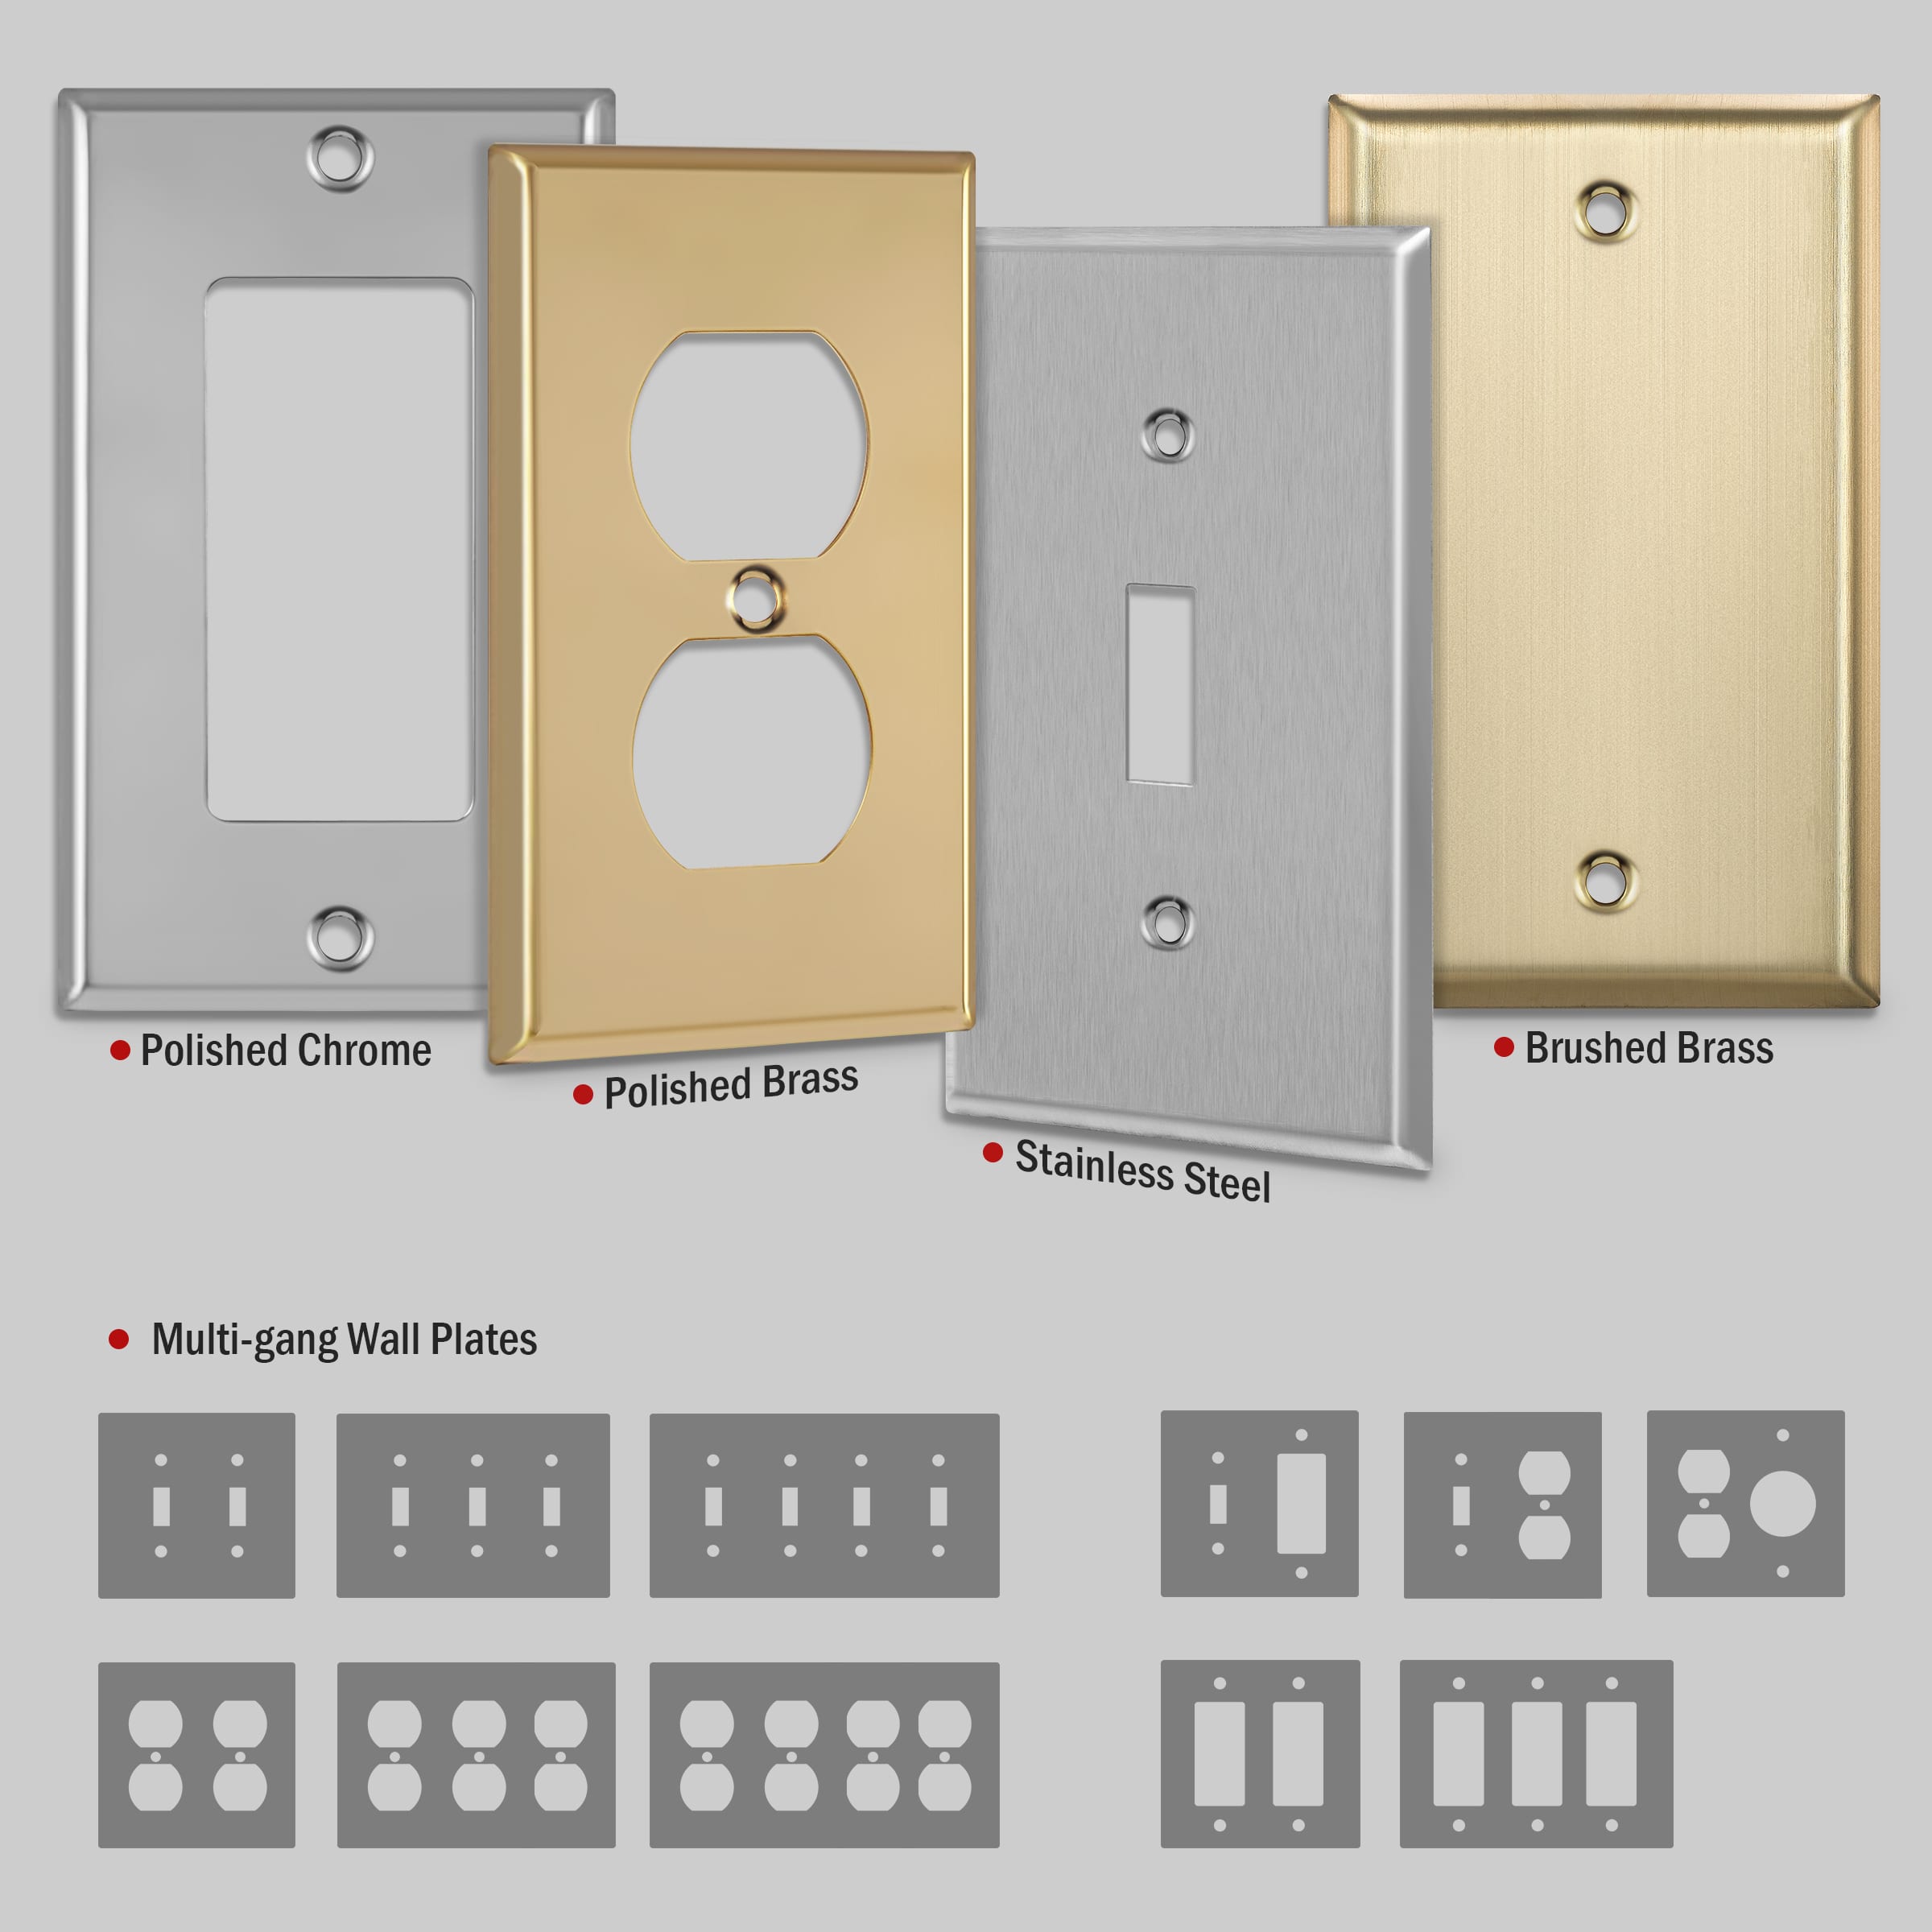 3-Gang Metal Toggle Switch Wall Plate